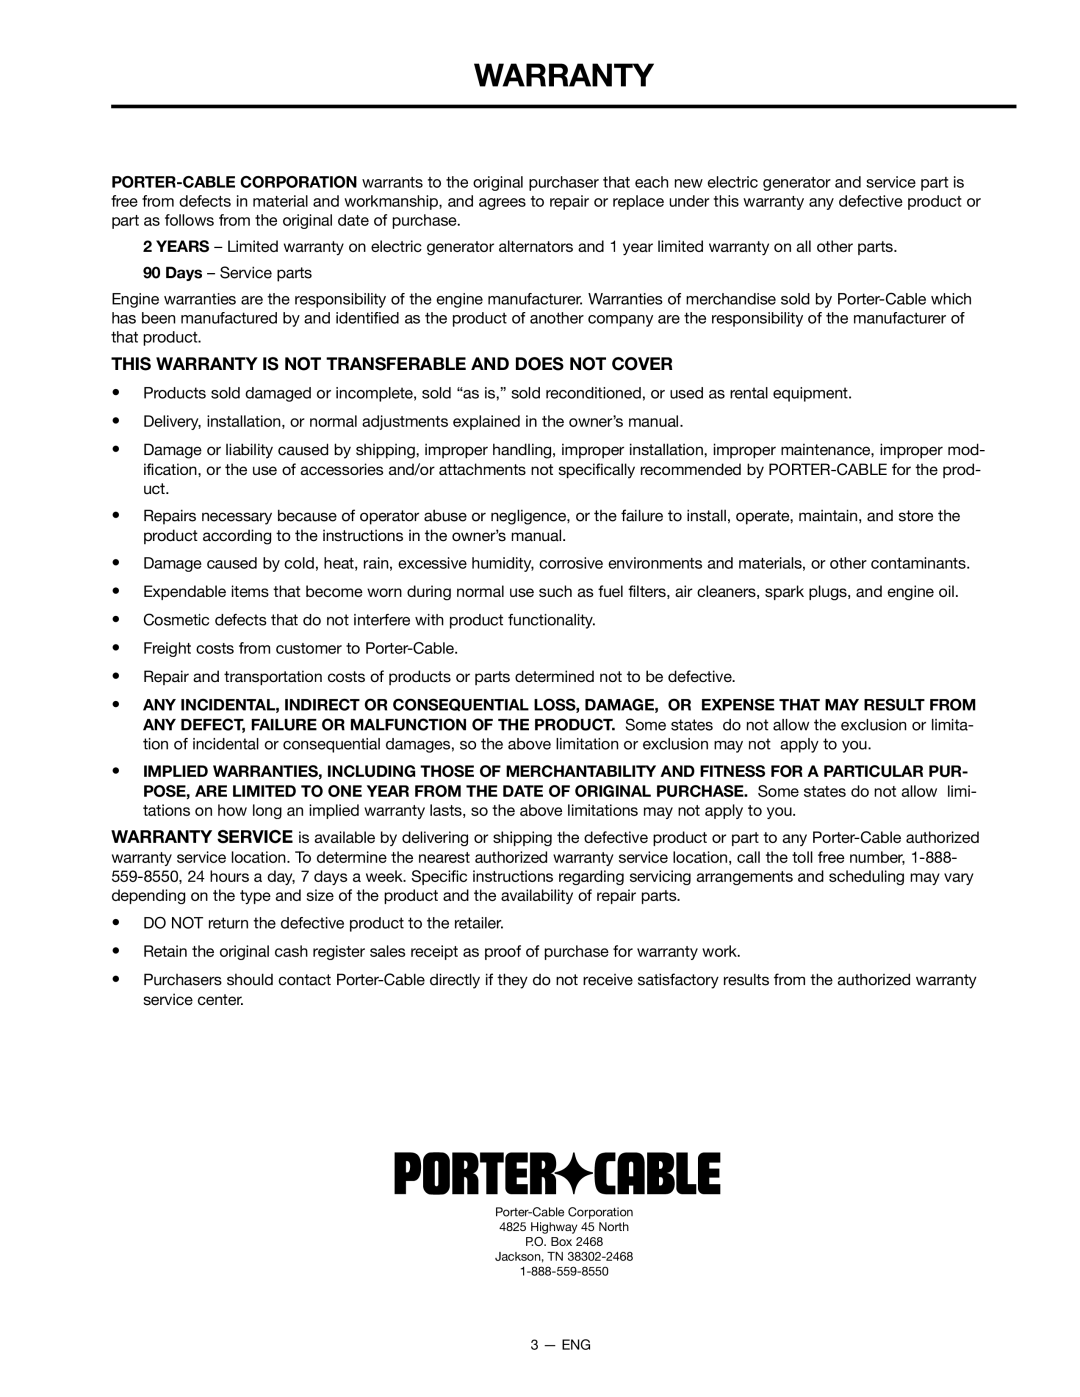 Porter-Cable BSI550 instruction manual This Warranty Is Not Transferable And Does Not Cover 